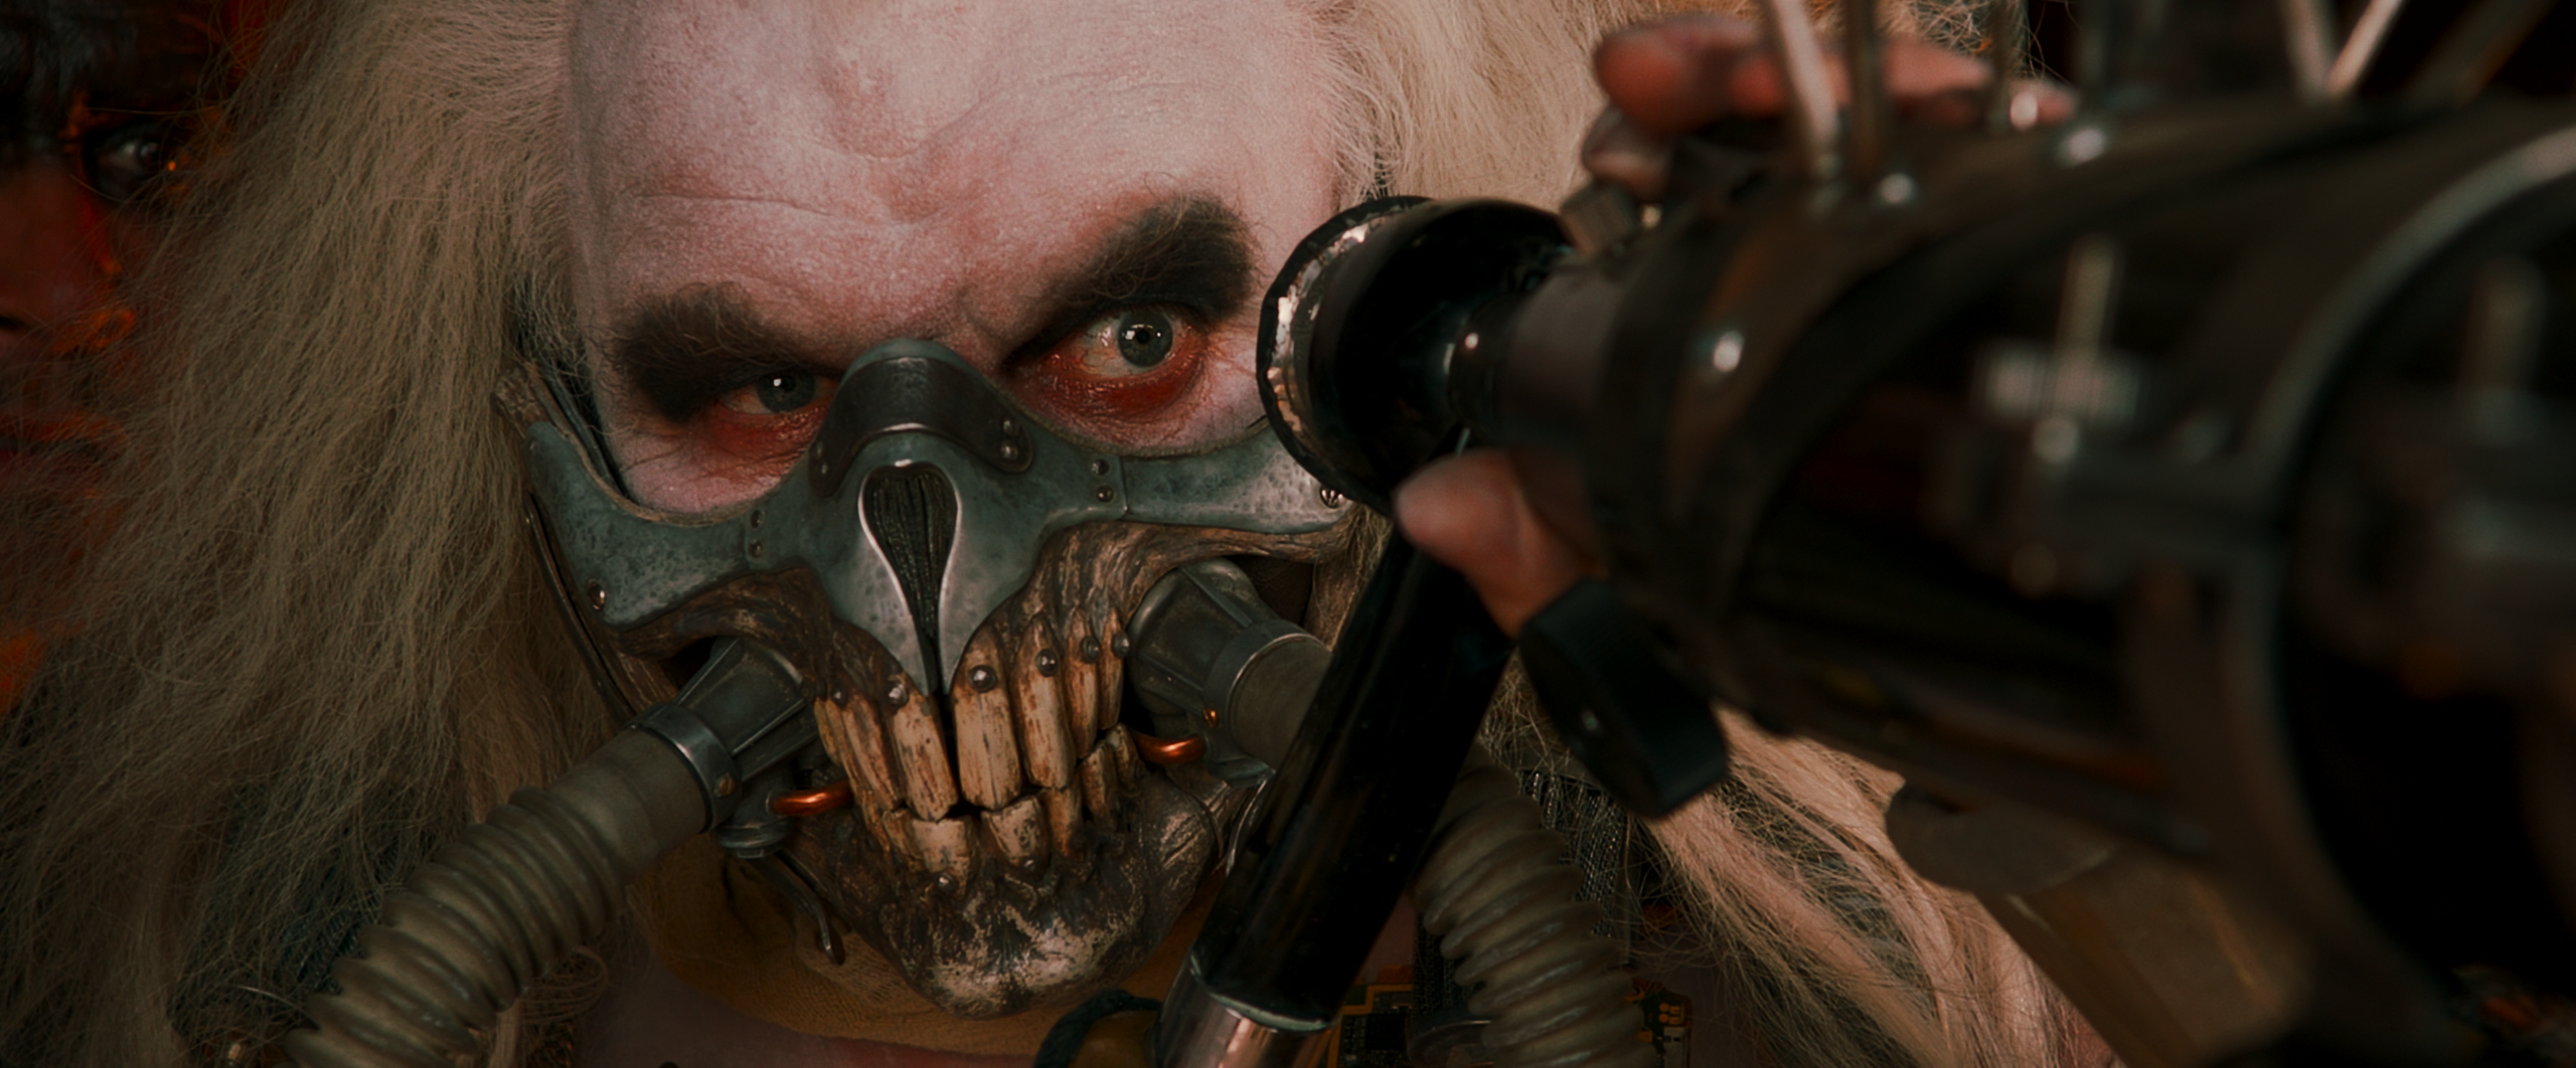 Immortan Joe with white hair red rings under his eyes and a metal cage housing his teeth, looks from behind a telescope